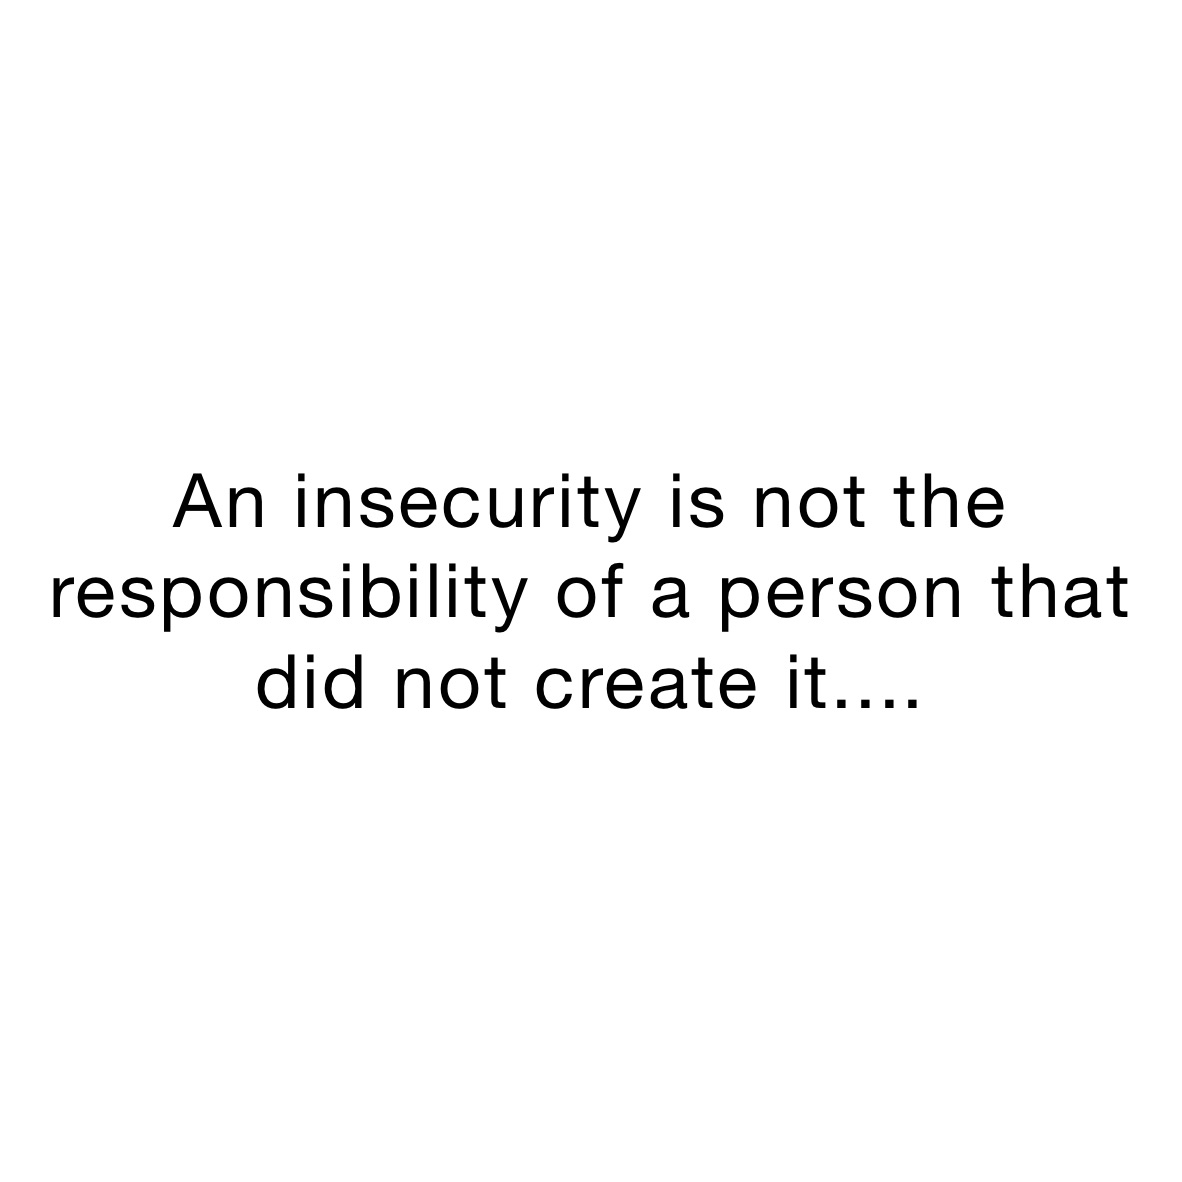 An insecurity is not the responsibility of a person that did not create it....